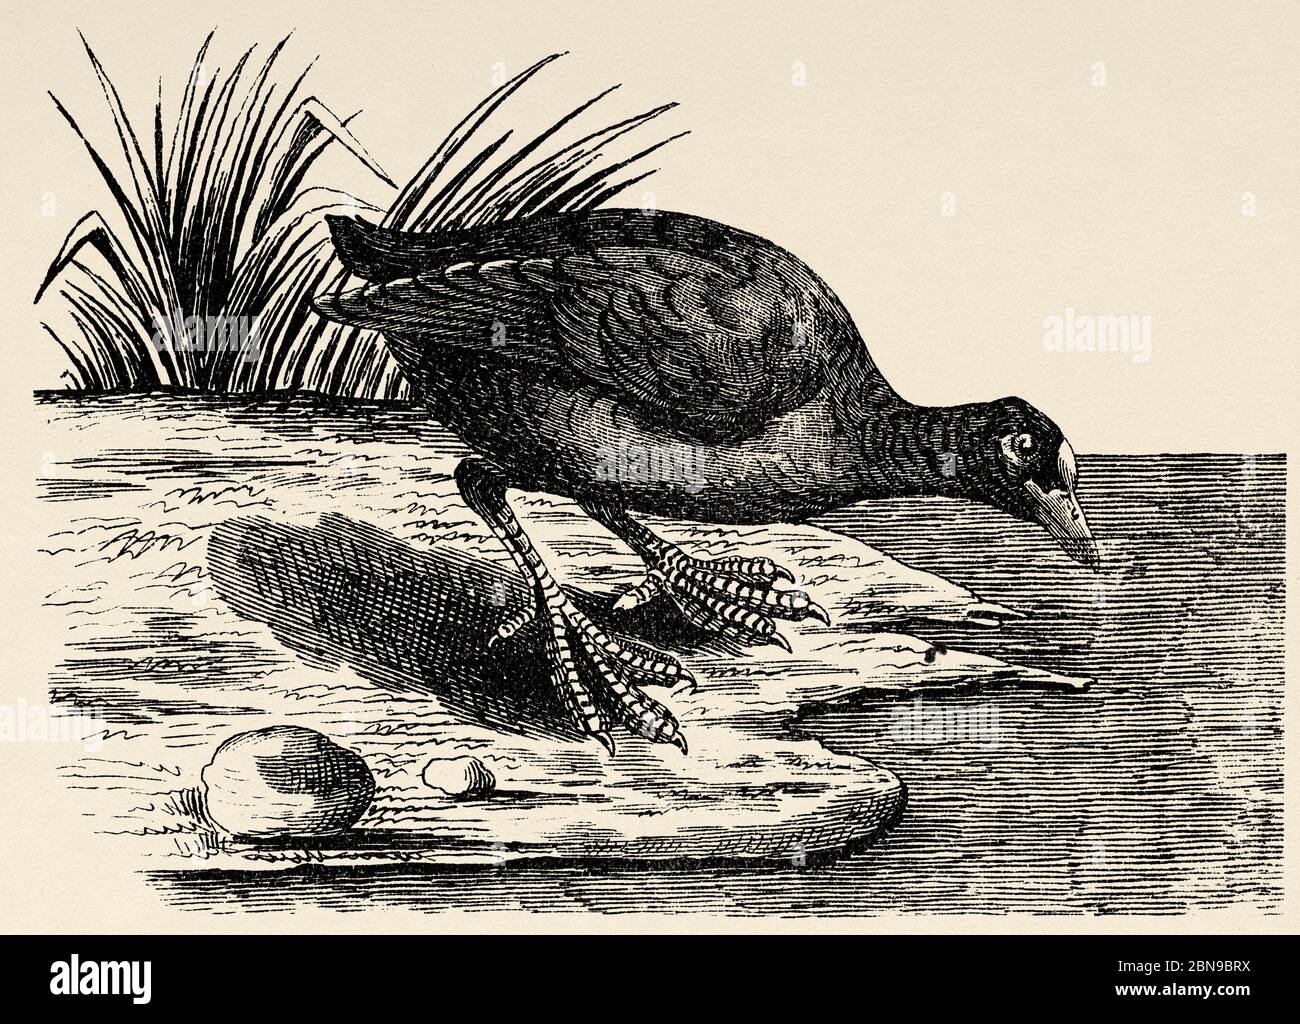 The coot (Fulica atra) is a species of group bird in the family Rallidae that lives in lakes, rivers, marsh ponds, and in winter, in sheltered bays. Its range covers Eurasia, North Africa and Oceania. Old engraved animal illustration 19th century Stock Photo